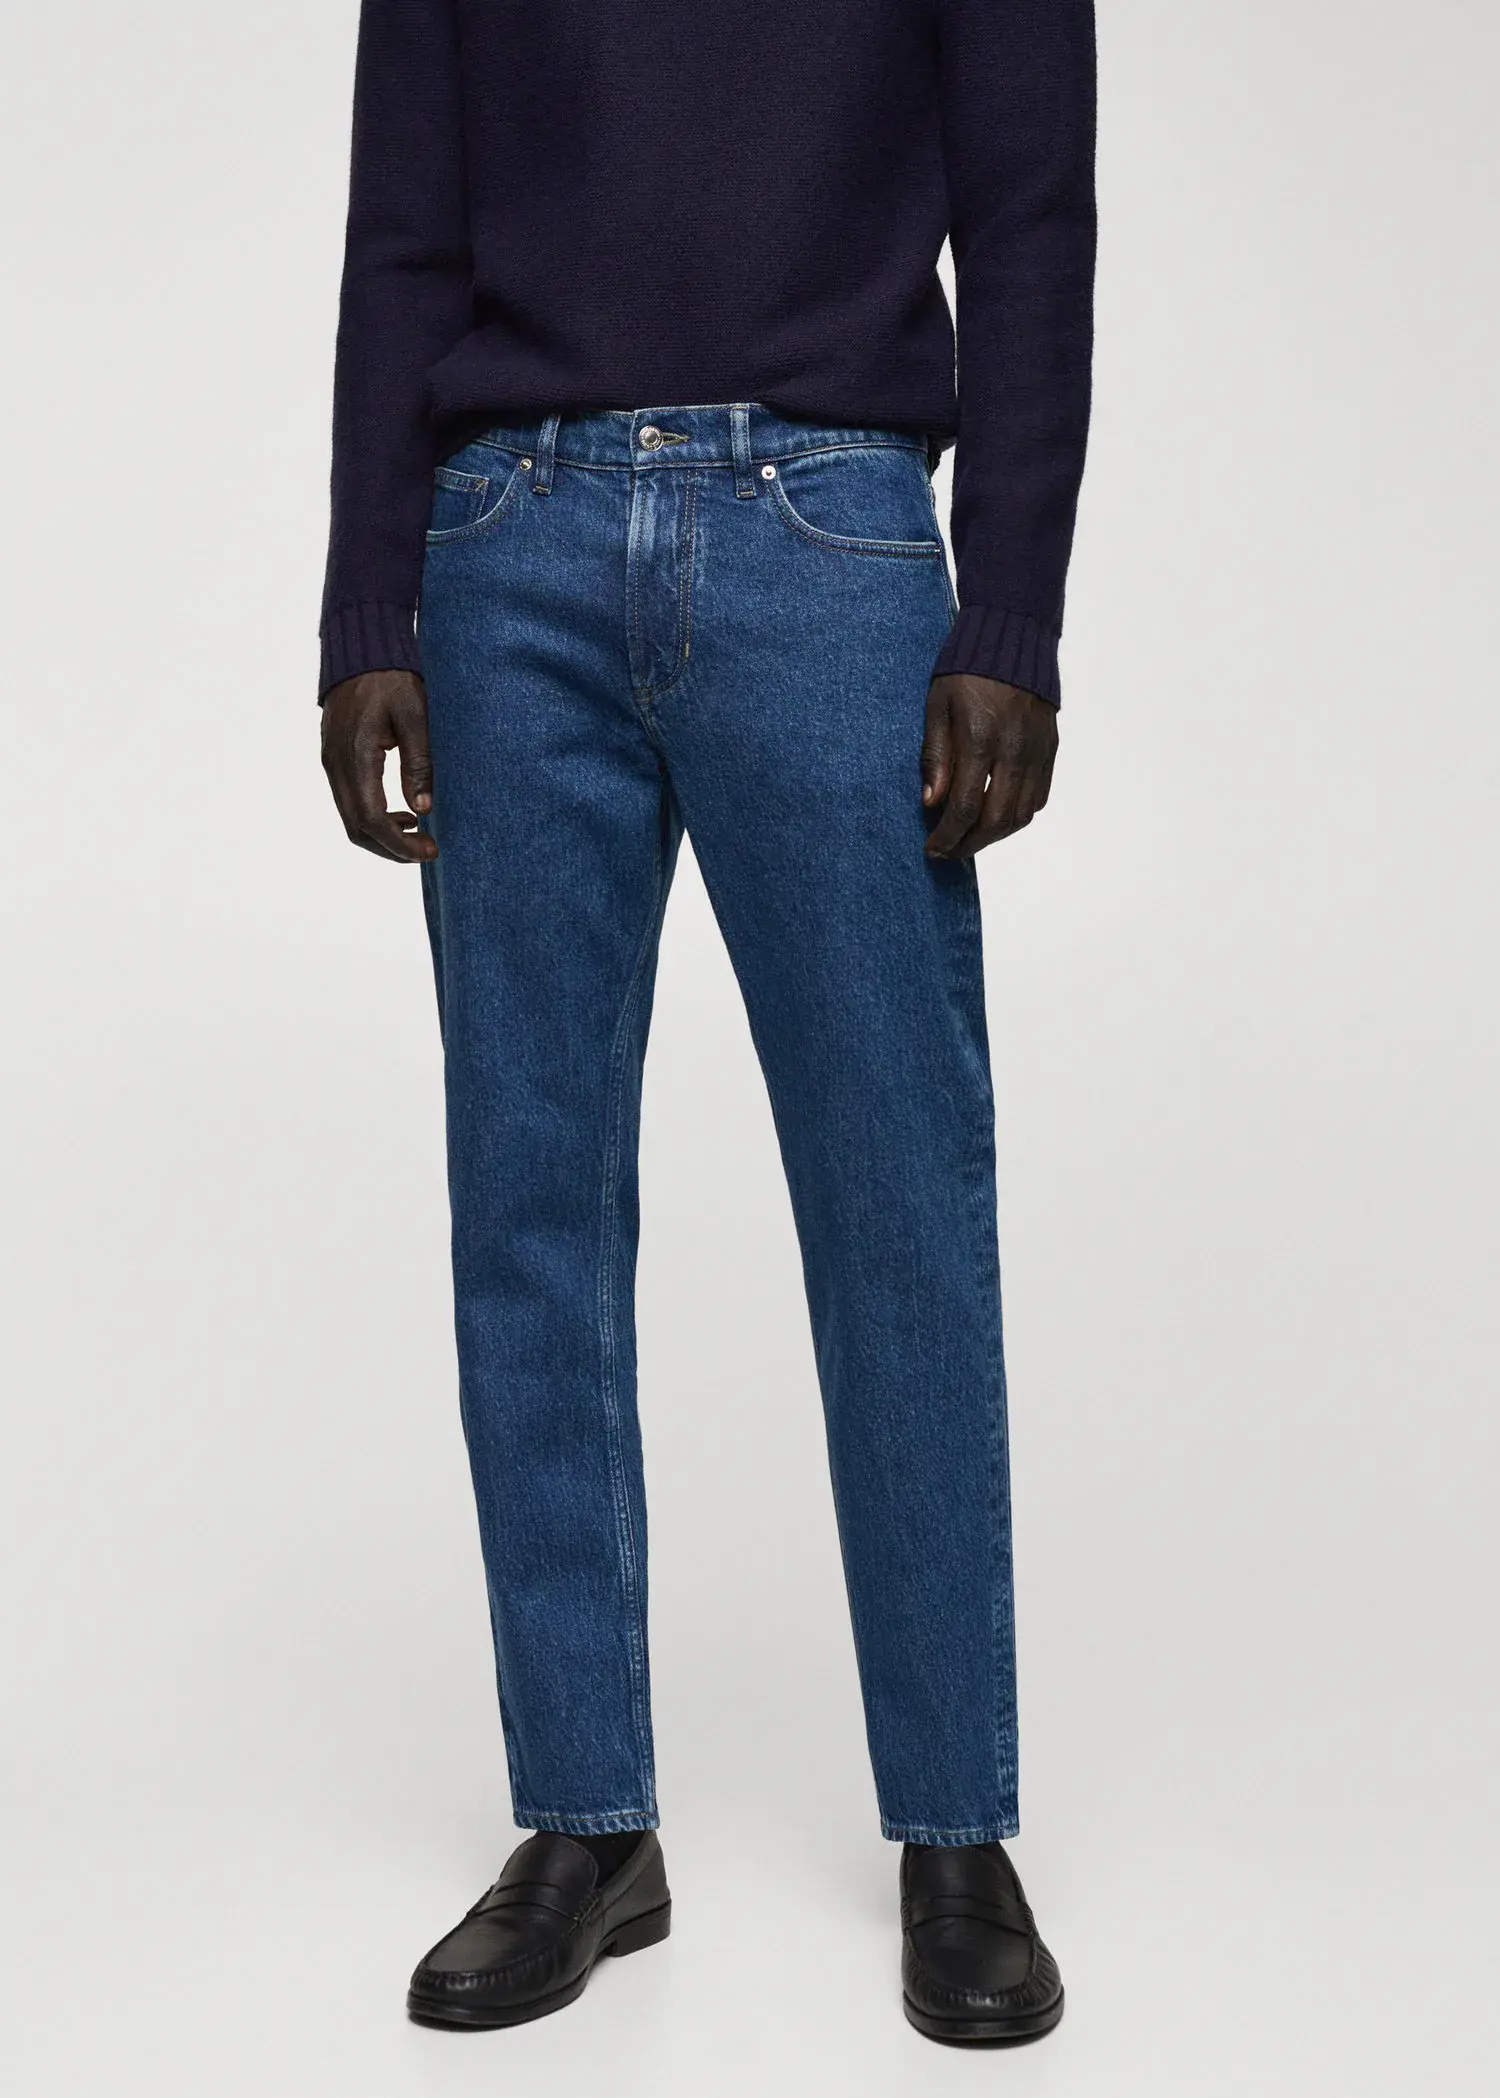 Mango Jeans Ben tappered fit. 2